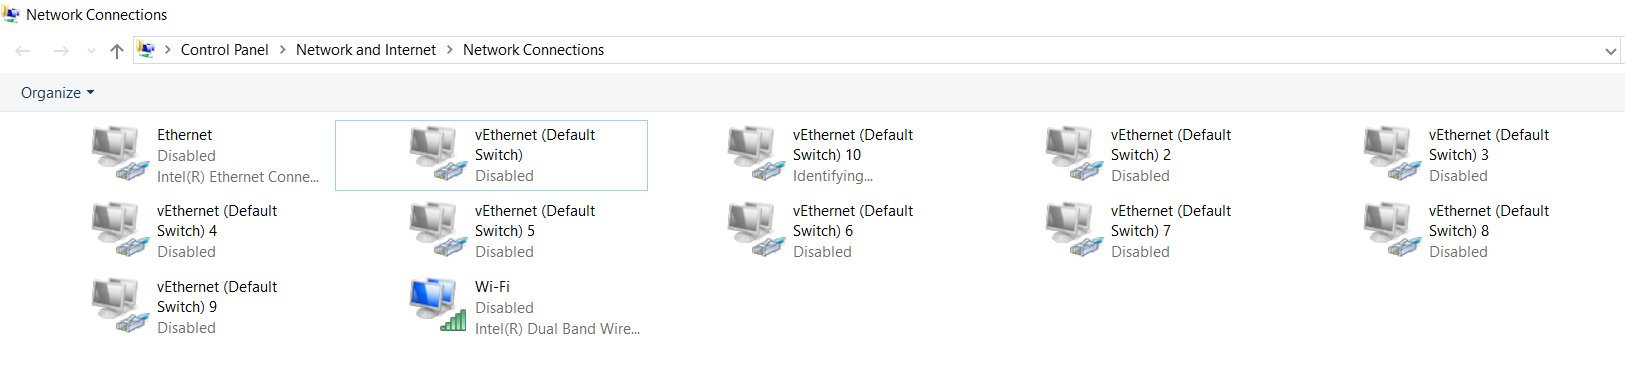 vEthernet (Default Switch)  keeps replicating itself 9c02X.png